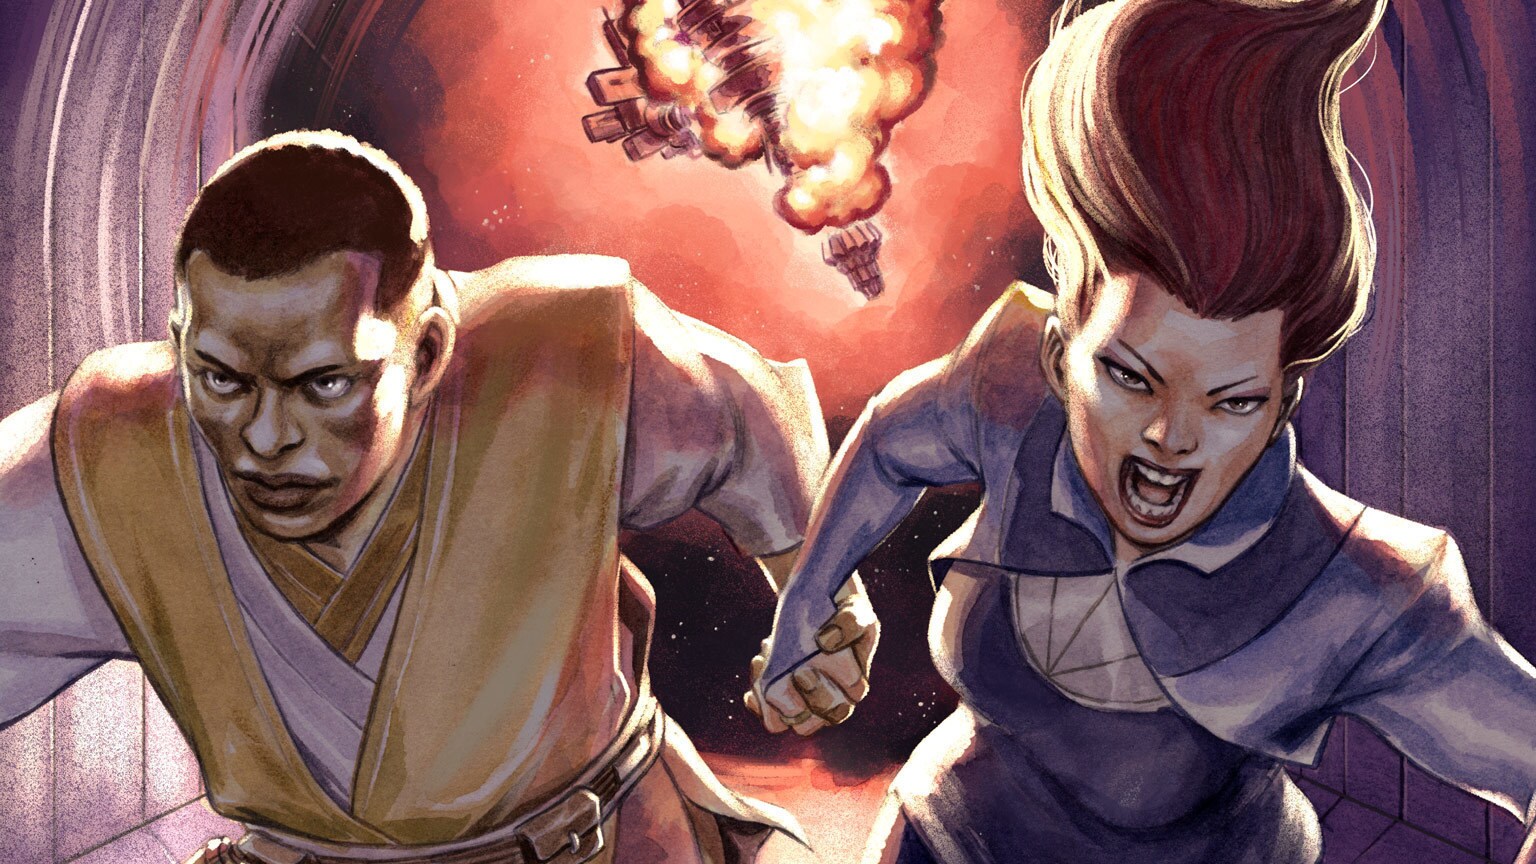 Starlight Falls in Marvel’s Star Wars: The High Republic: Trail of Shadows #5 - Exclusive Preview